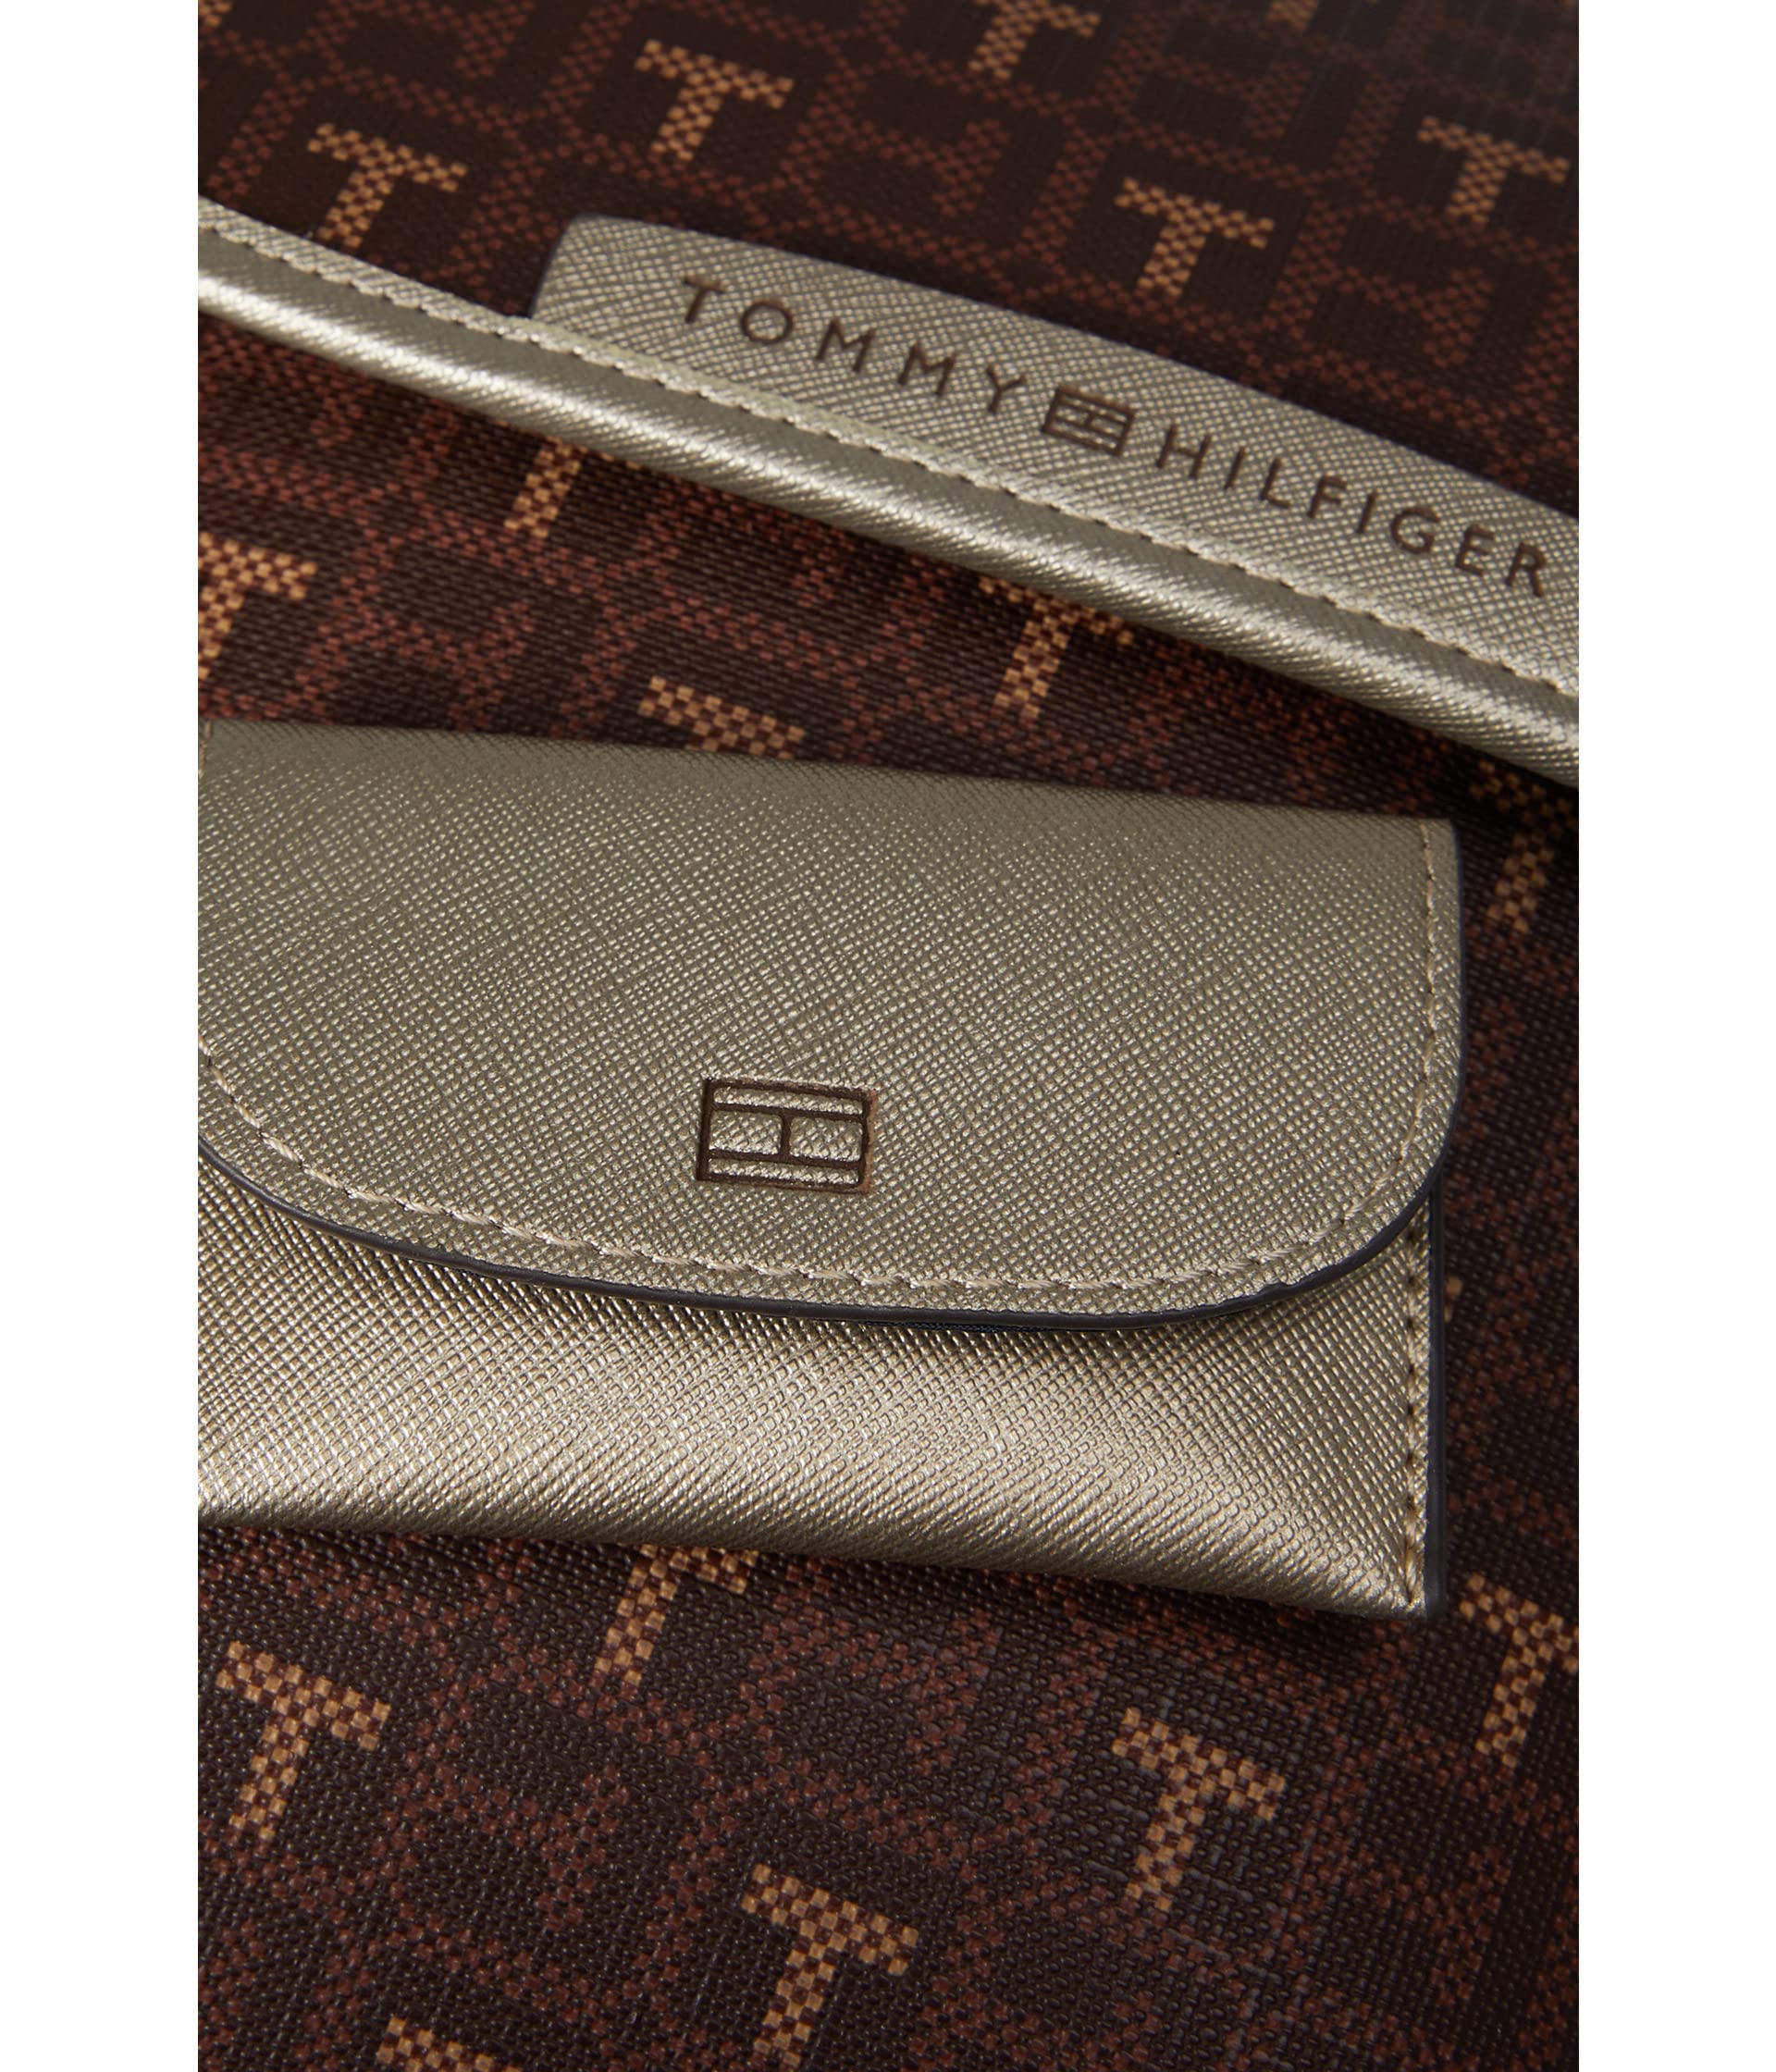 Tommy Hilfiger Kennedy II Flap Backpack w/Hangoff-Coated Square Monogram Chestnut/Heritage Brown/Gold Metallic Trim One Size